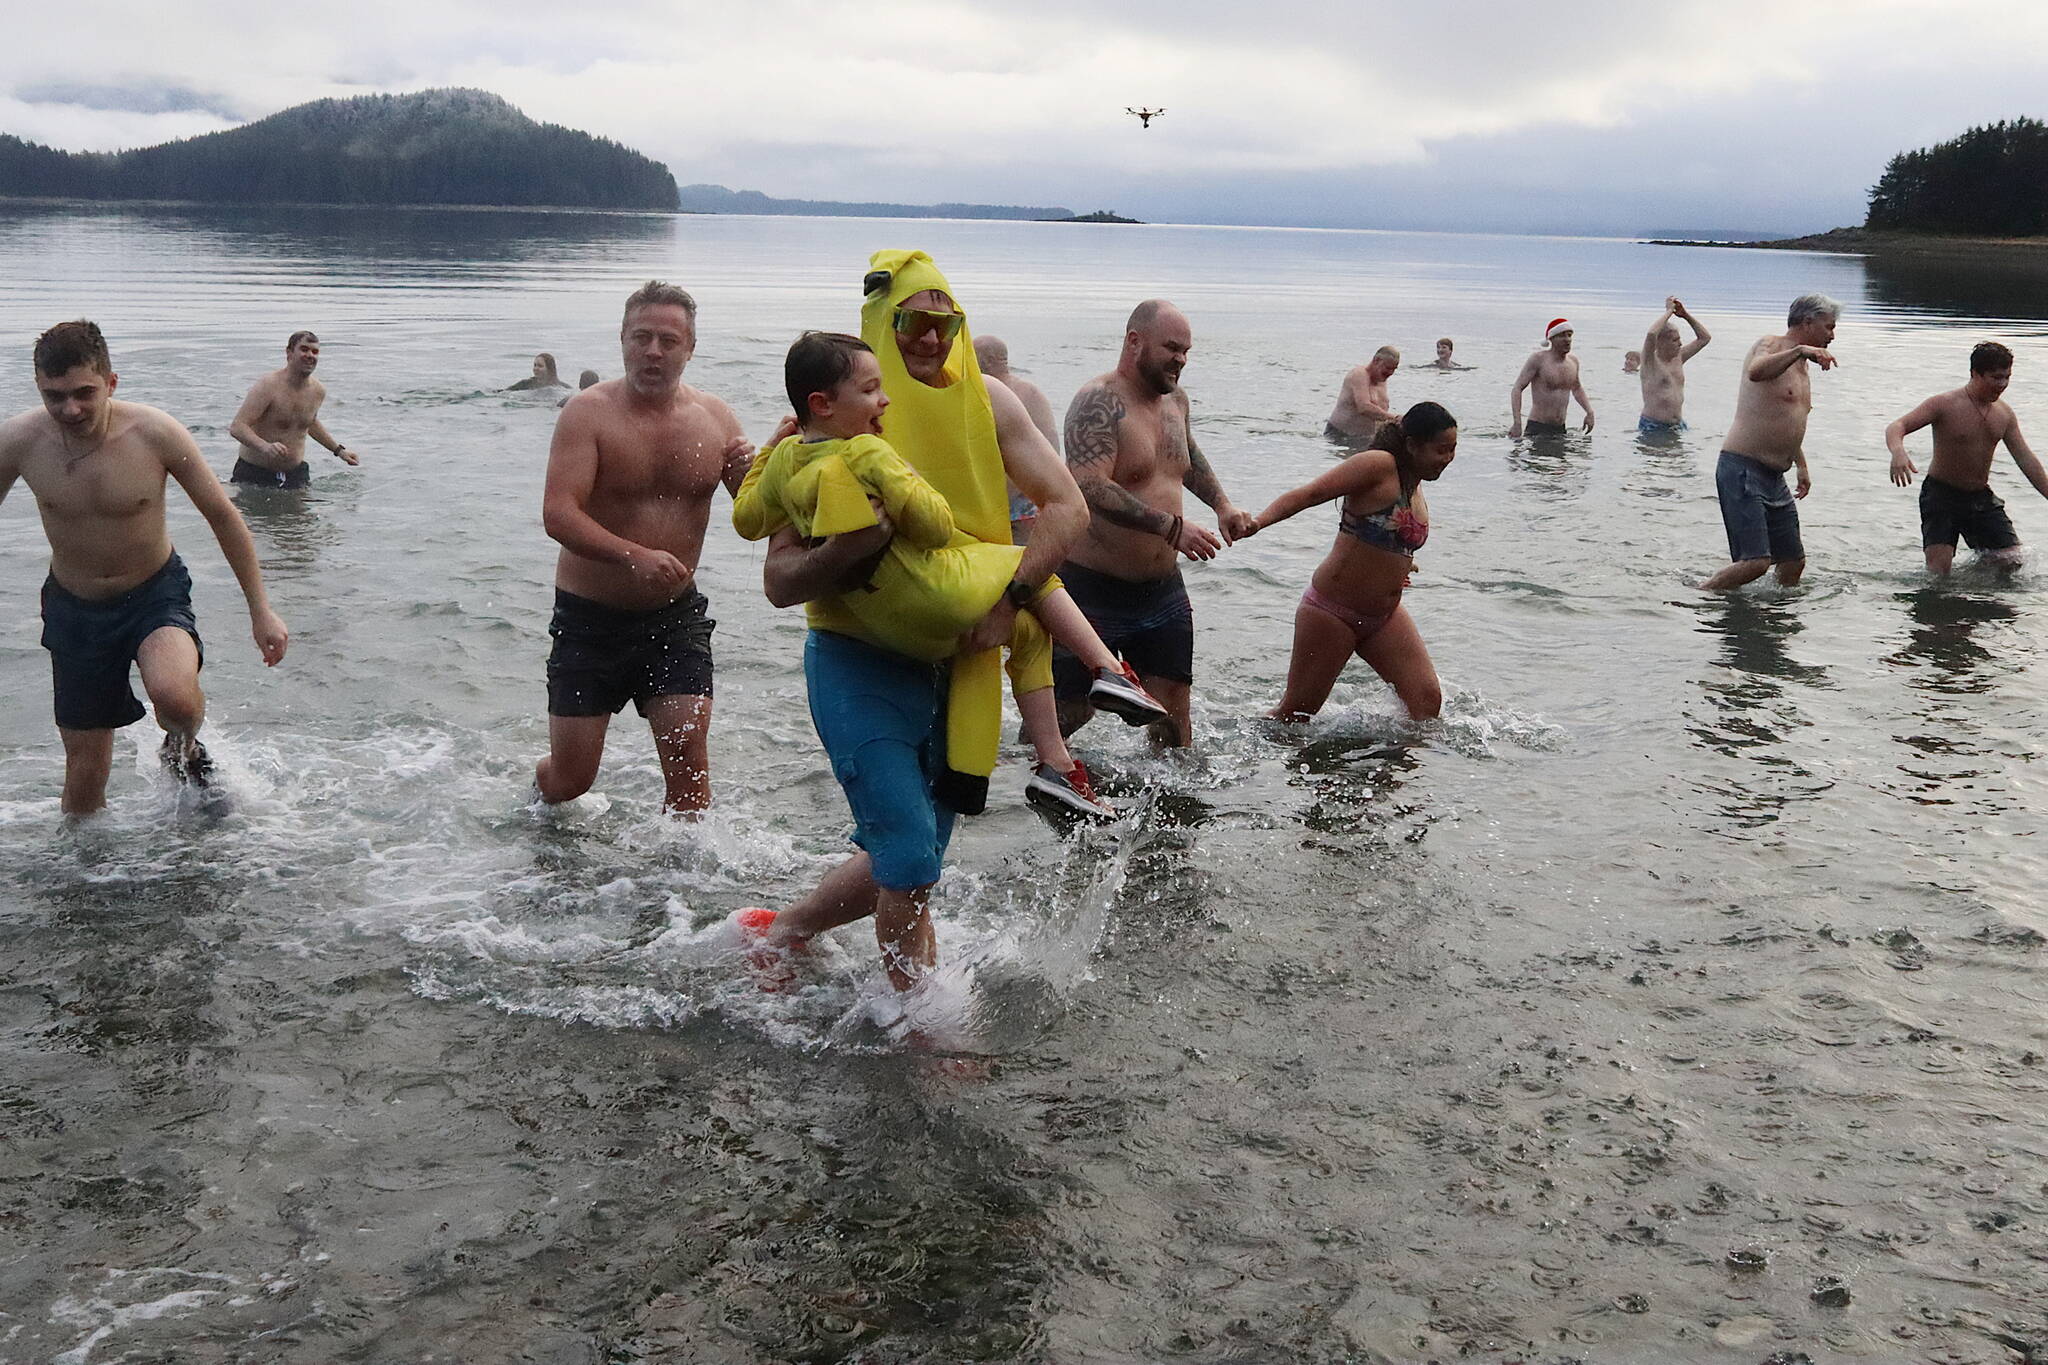 Brett Weideman, wearing a banana costume, and his son Bodhi, 7, dressed as a Pikachu, celebrate the New Year by emerging from Auke Bay during the 33rd annual Juneau Polar Bear Dip at the Auke Village Recreation Area on Monday. (Mark Sabbatini / Juneau Empire)